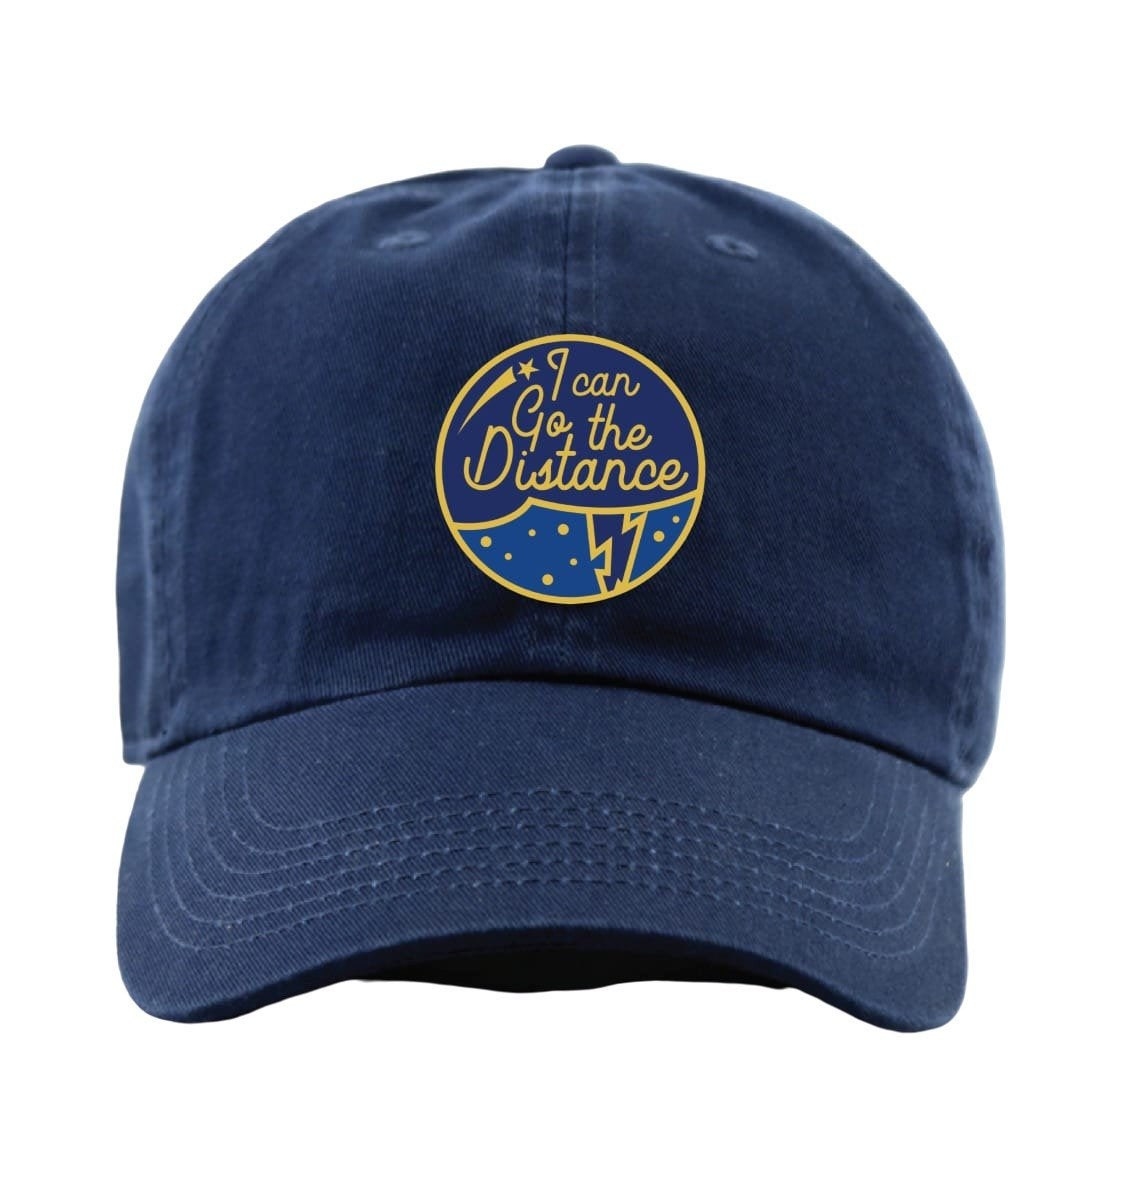 a navy blue baseball cap with a circular patch on the middle that says &quot;i can go the distance&quot; under a shooting star and above a lightning bolt